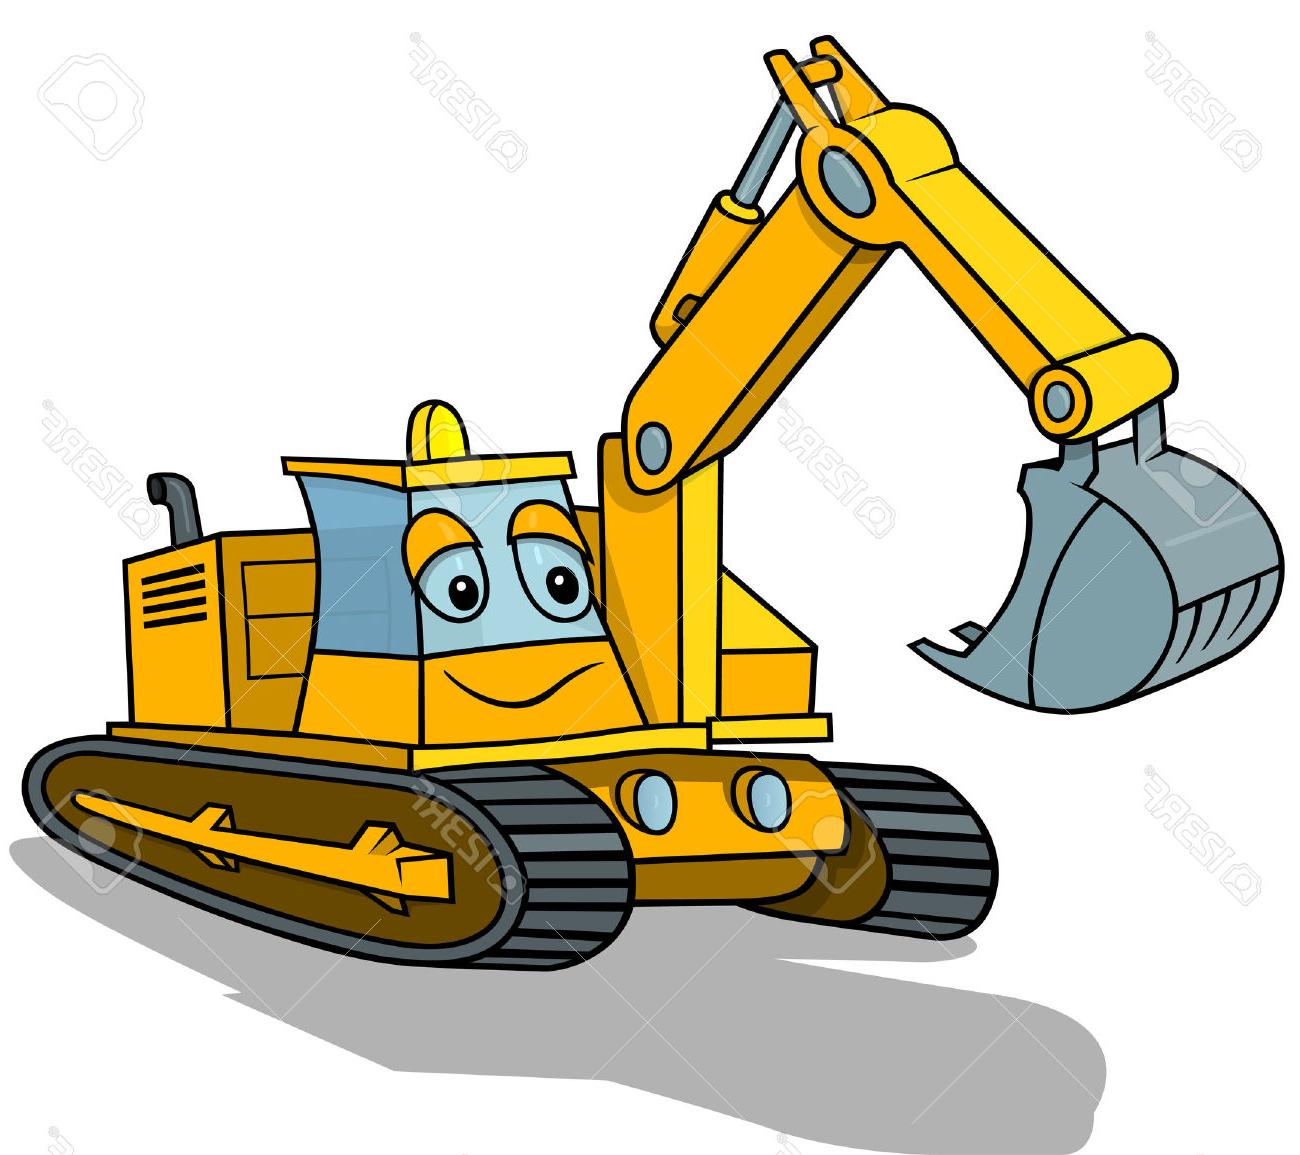 Excavator clipart file. Free download best on